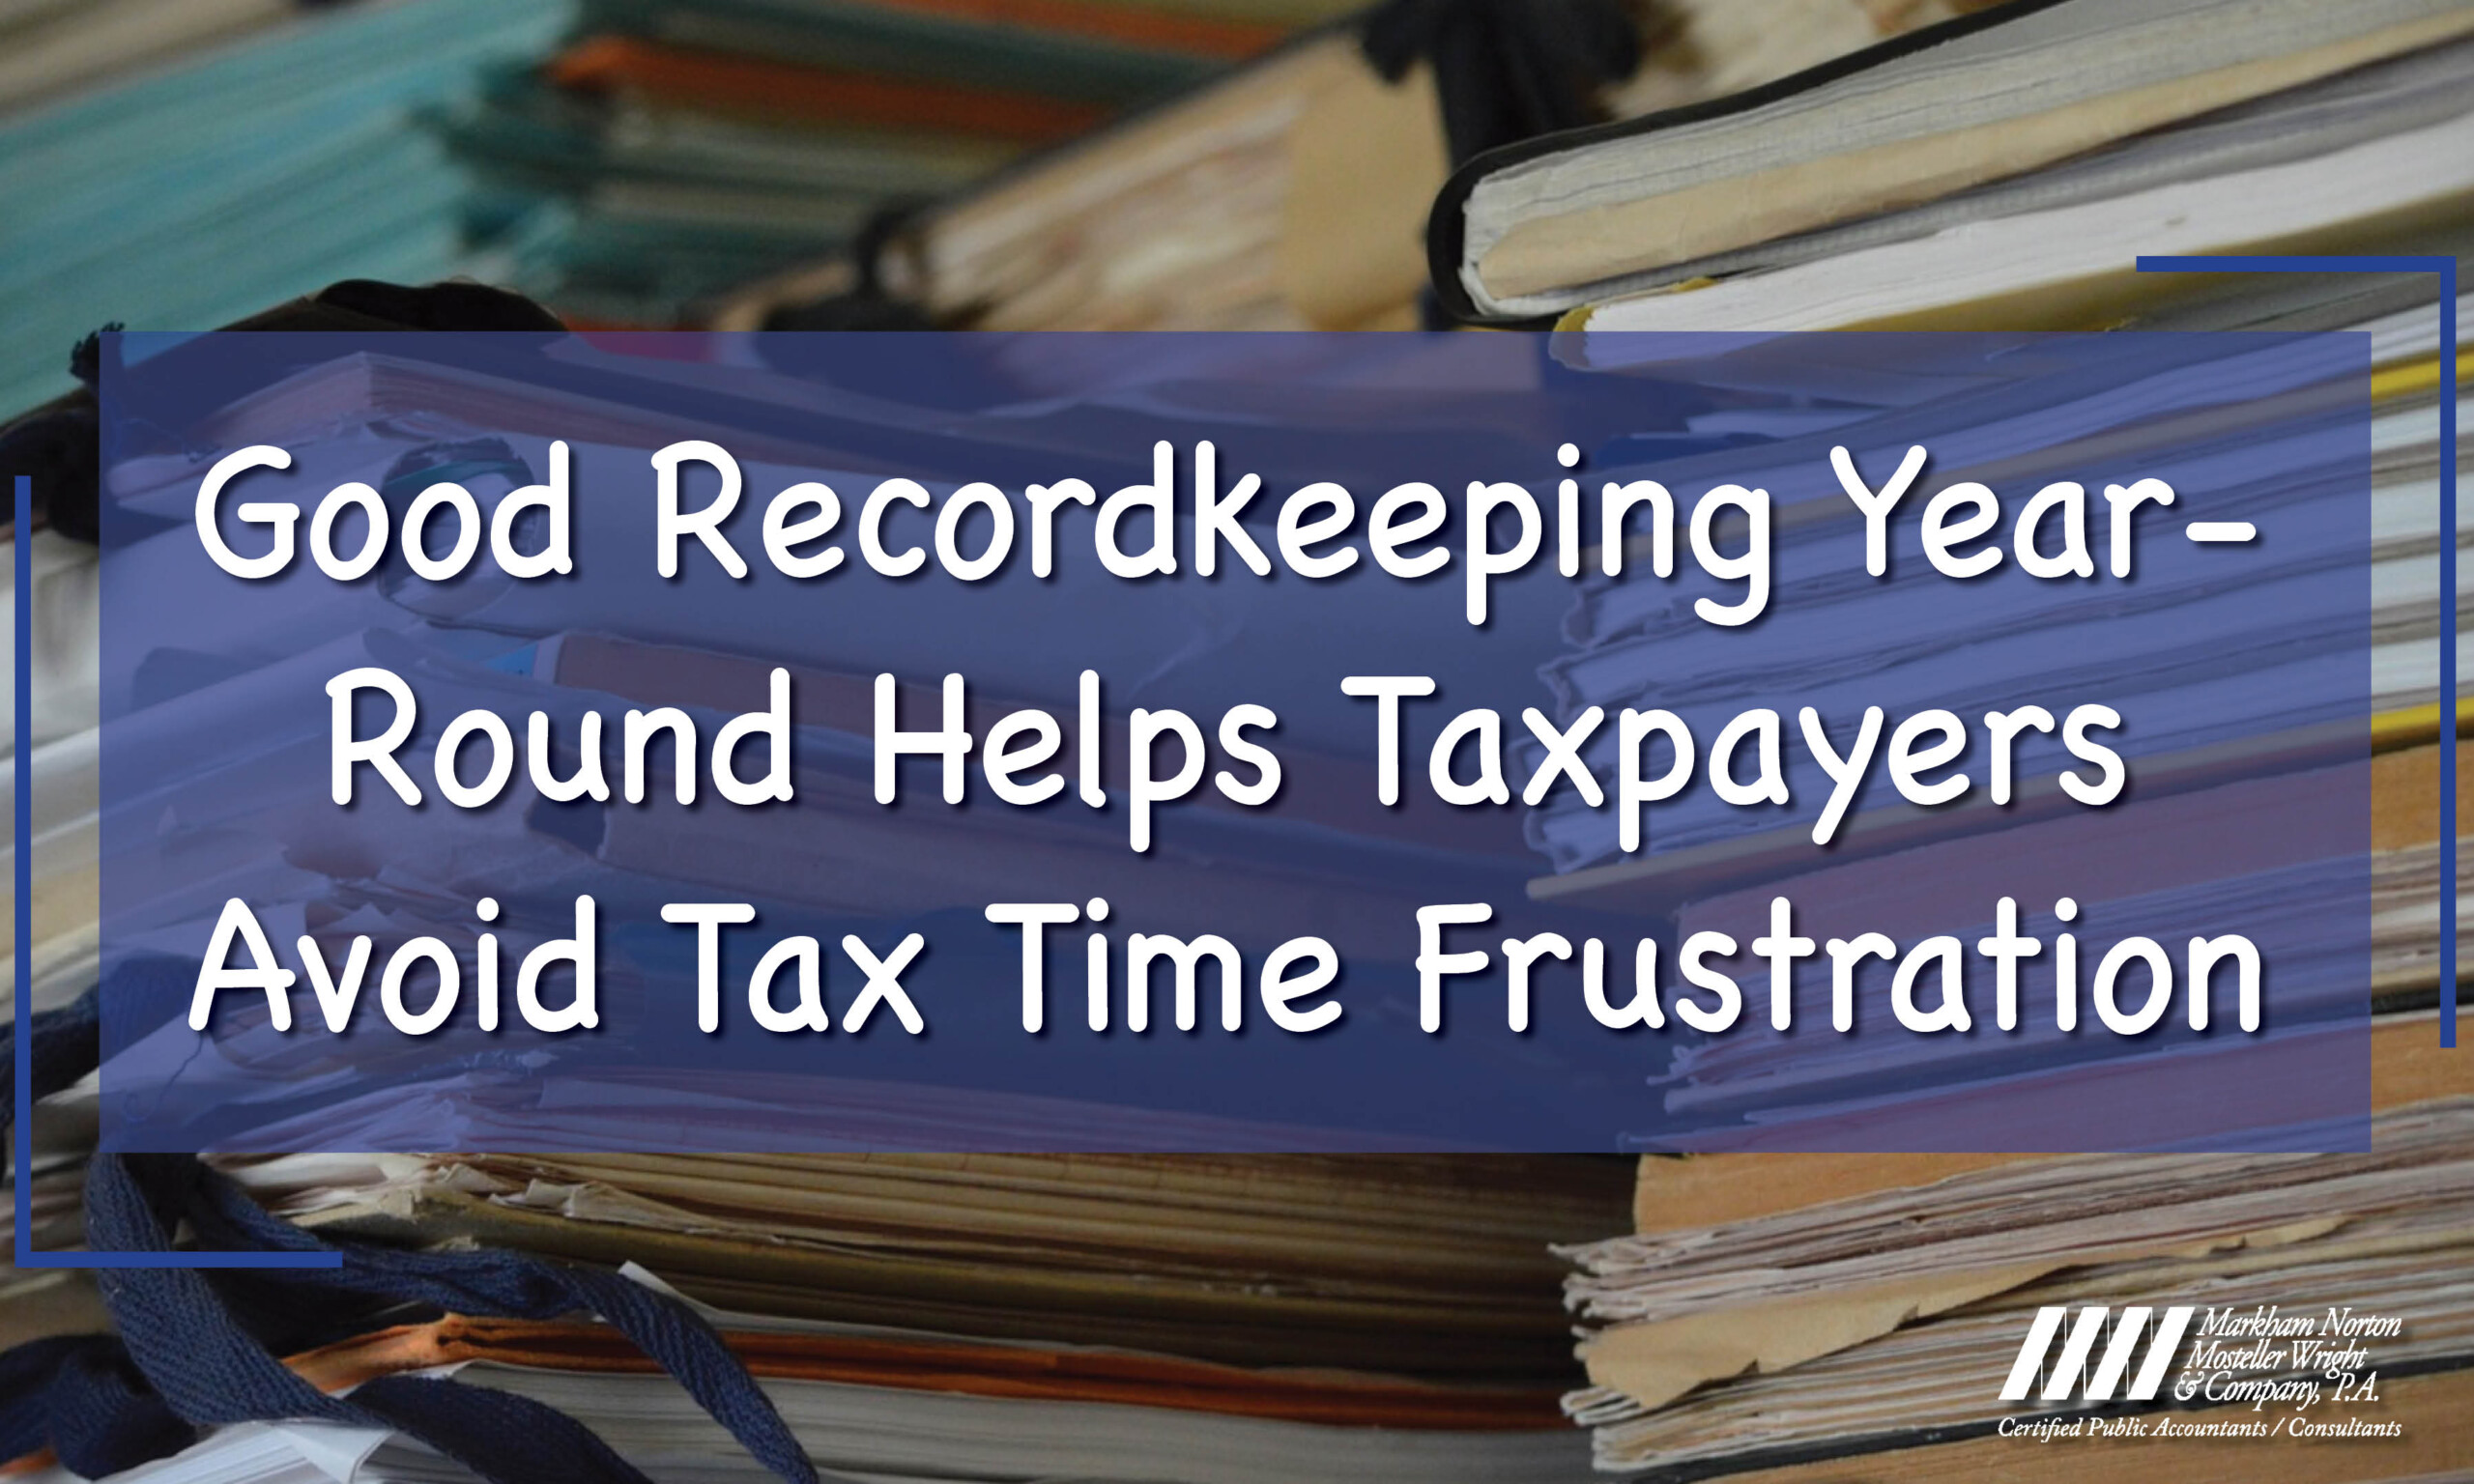 Good Recordkeeping Year-Round Helps Taxpayers Avoid Tax Time Frustration